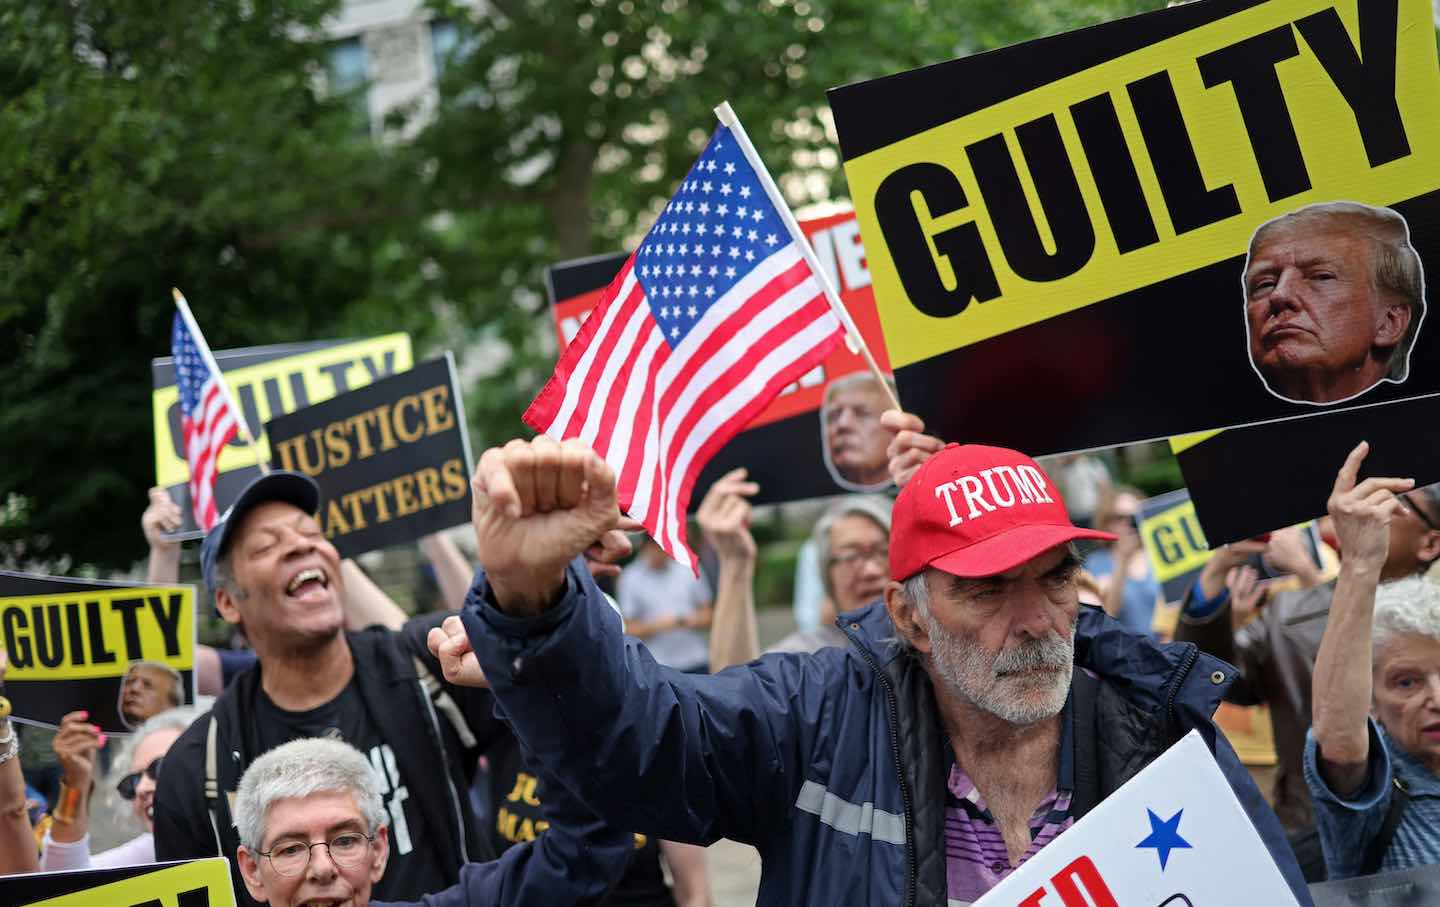 People react after former US president and Republican presidential candidate Donald J. Trump was sentenced in a criminal trial outside Manhattan Criminal Court in New York City on May 30.